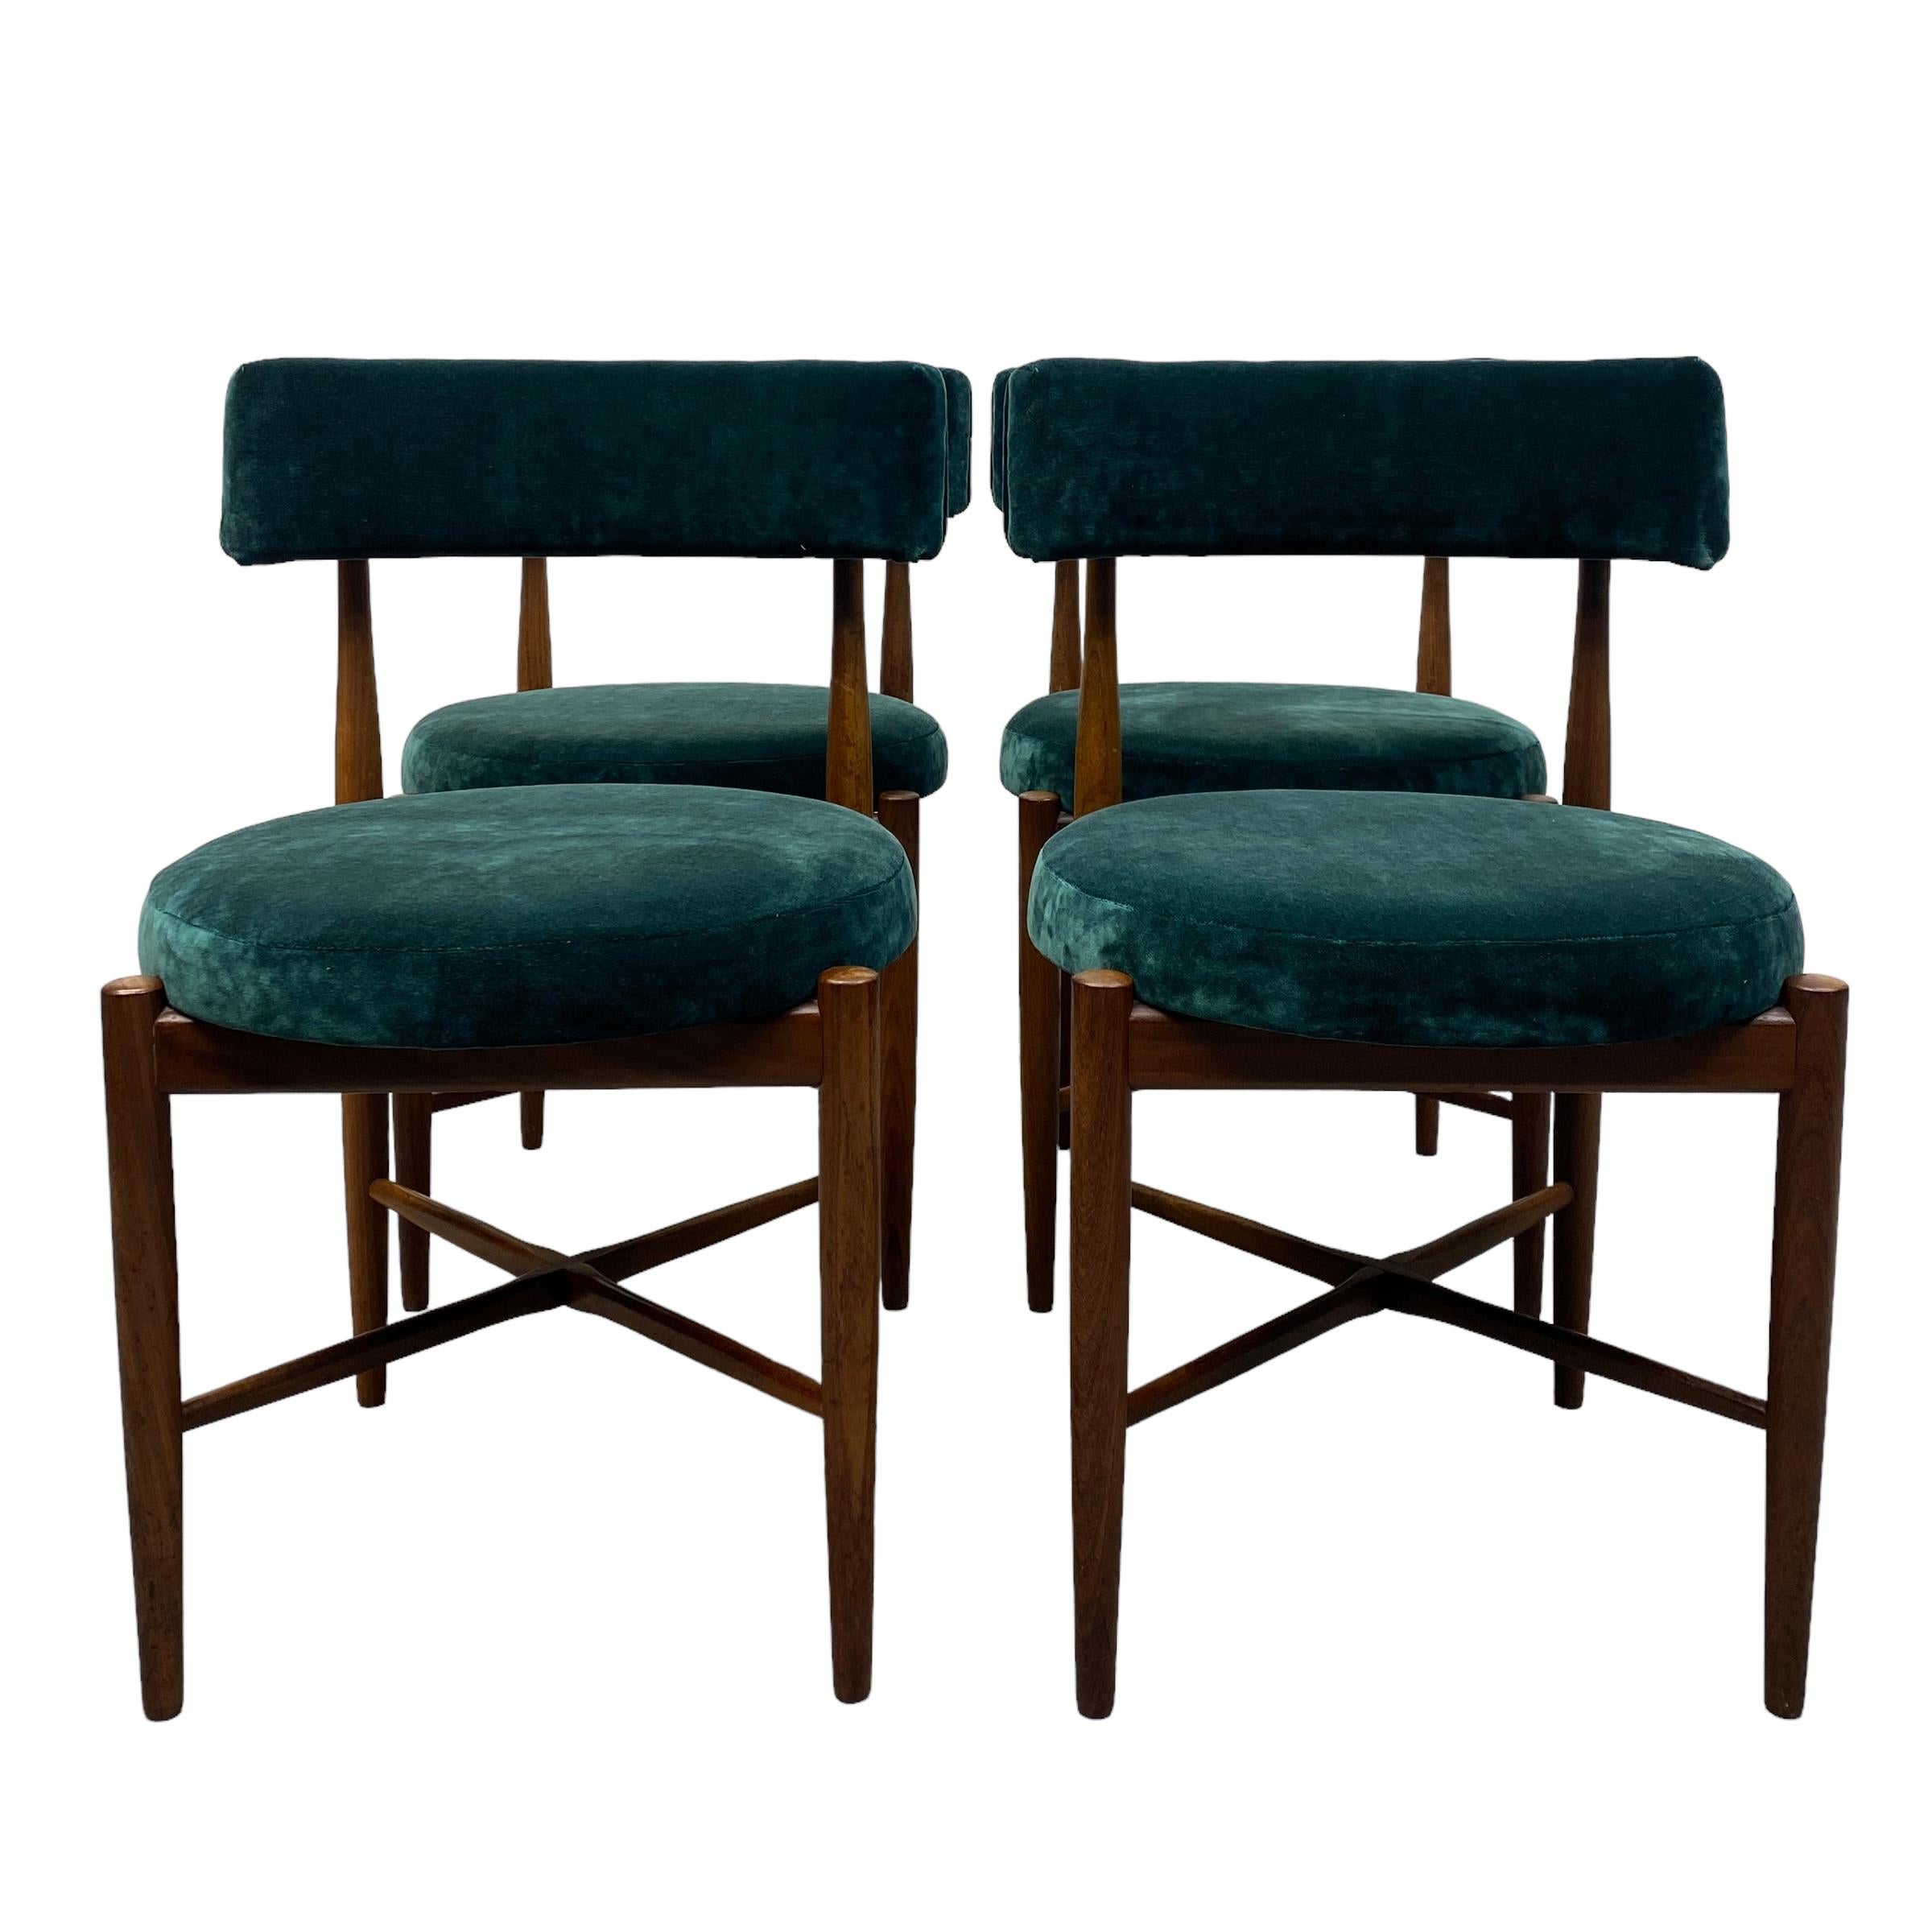 Midcentury Dining Chairs Kofod Larsen G Plan In Good Condition For Sale In Otley, GB